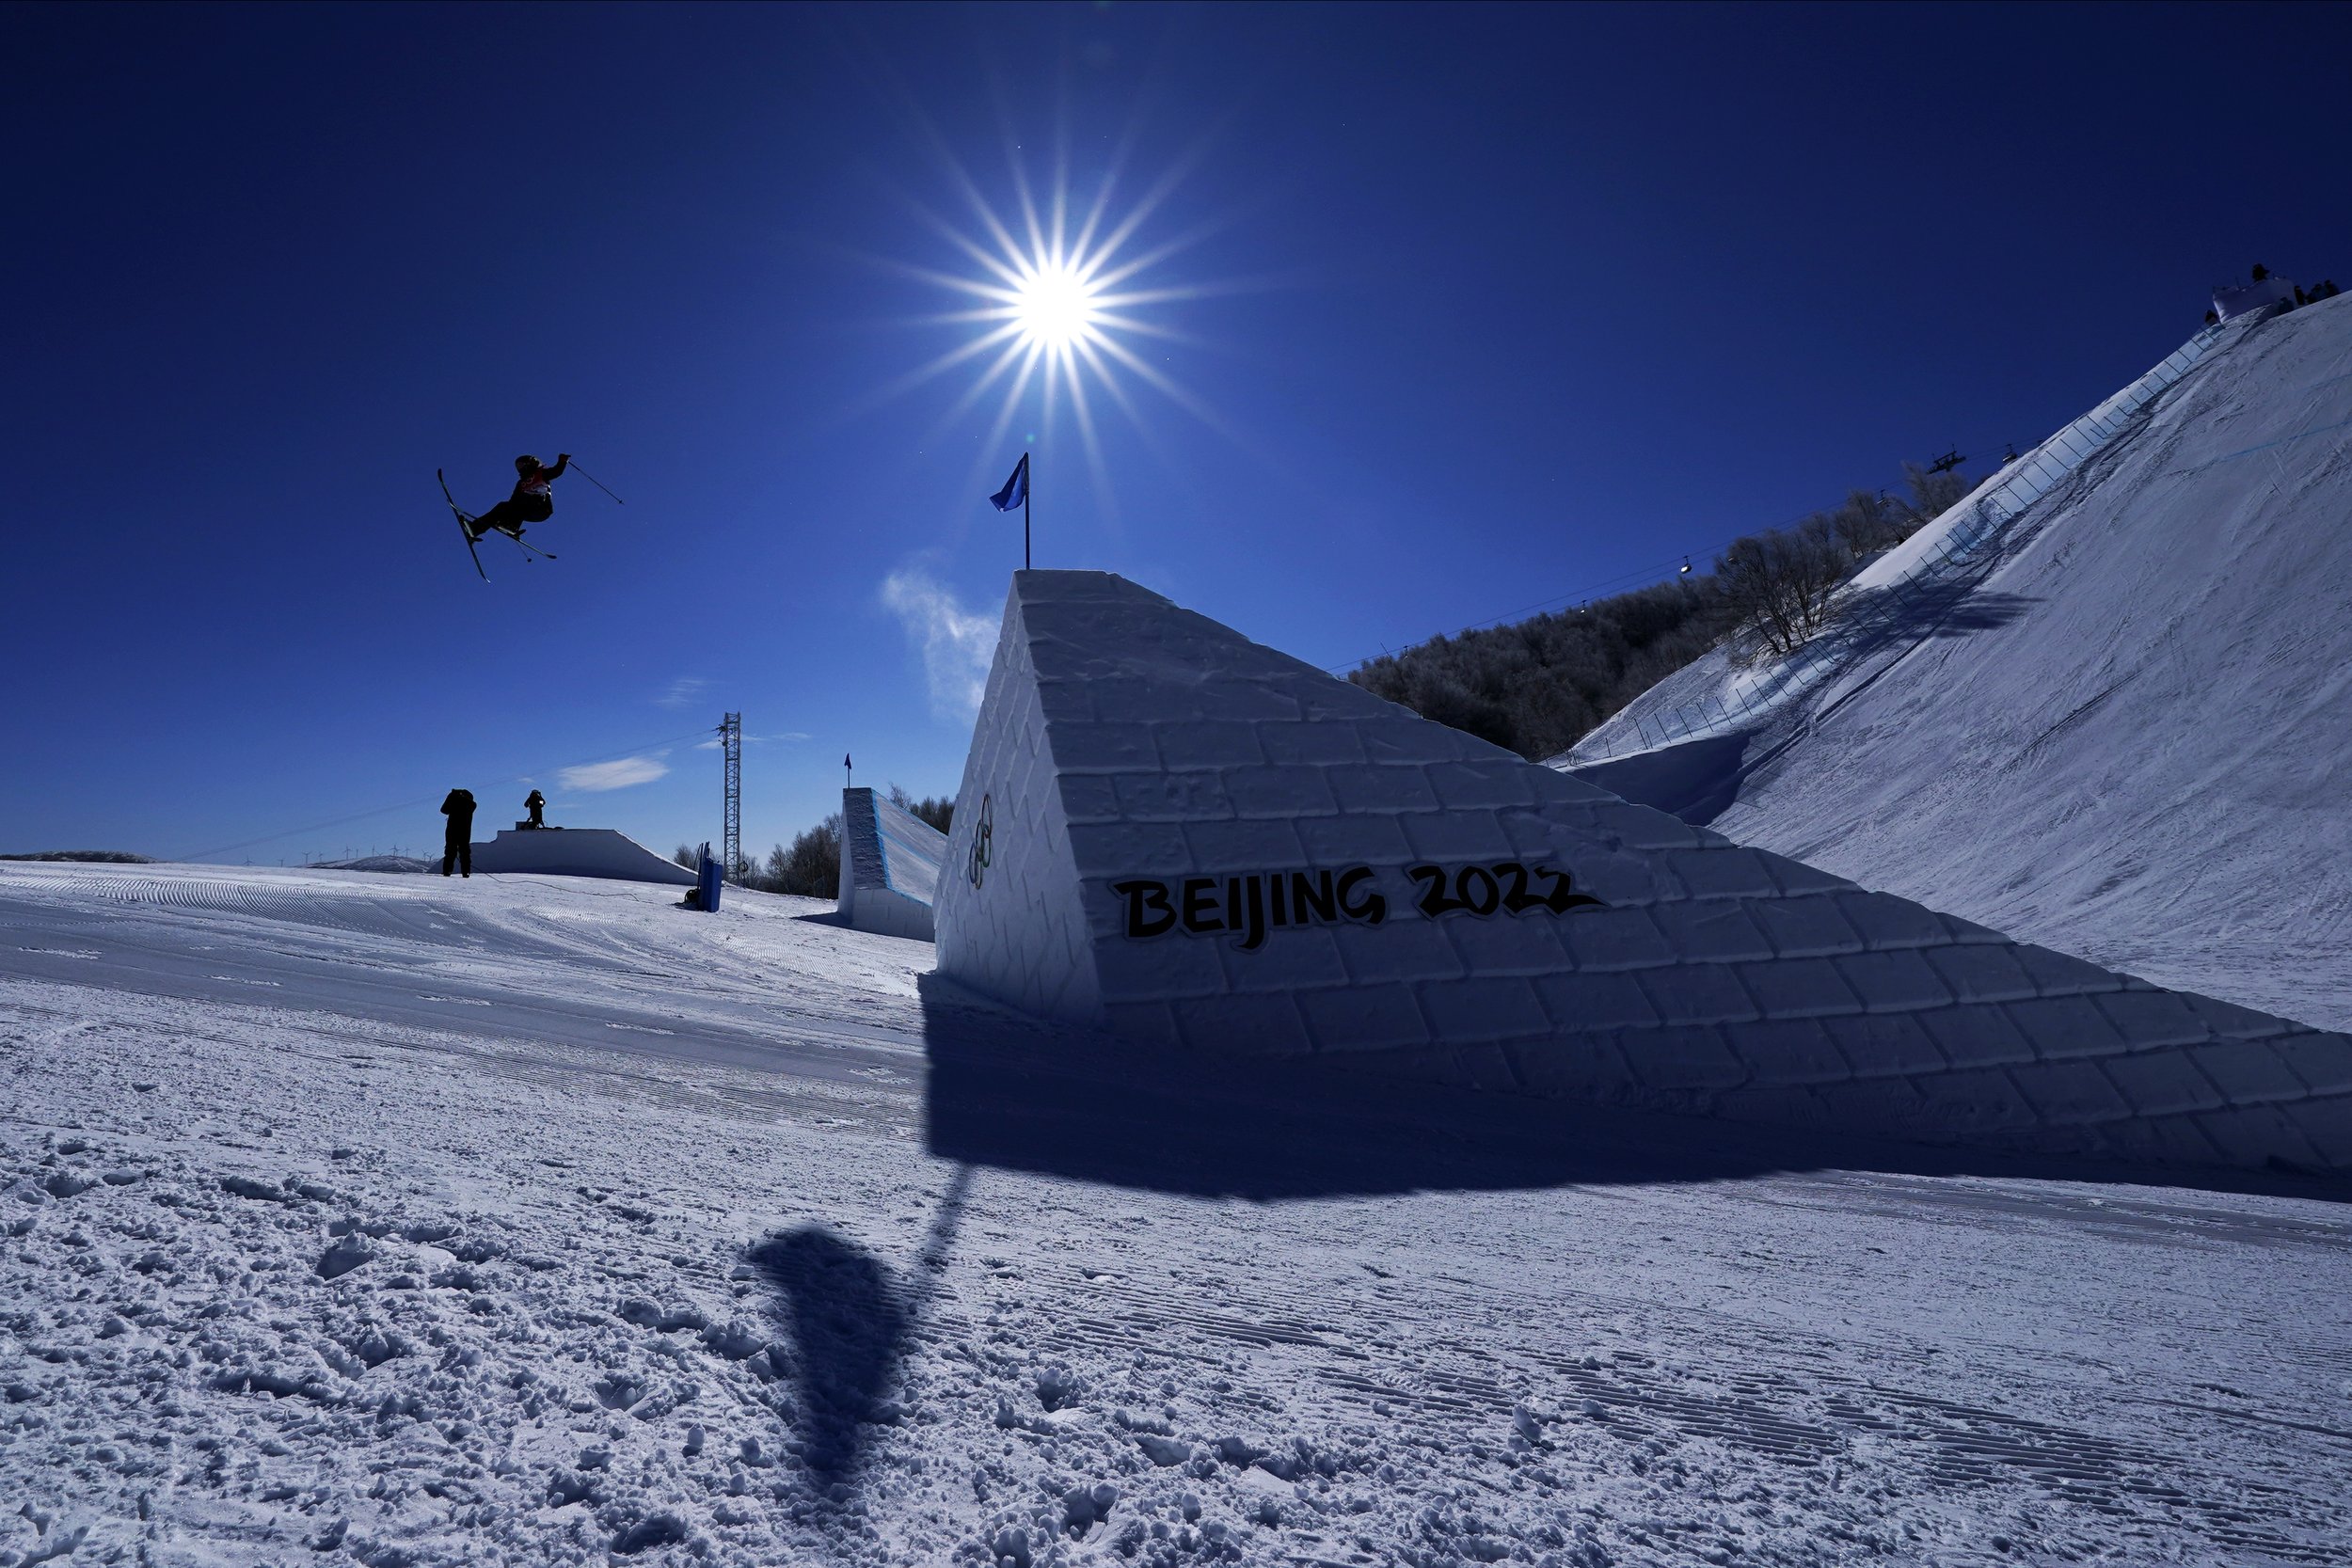  Britain's Katie Summerhayes competes during the women's slopestyle qualification at the 2022 Winter Olympics, Monday, Feb. 14, 2022, in Zhangjiakou, China. (AP Photo/Gregory Bull) 